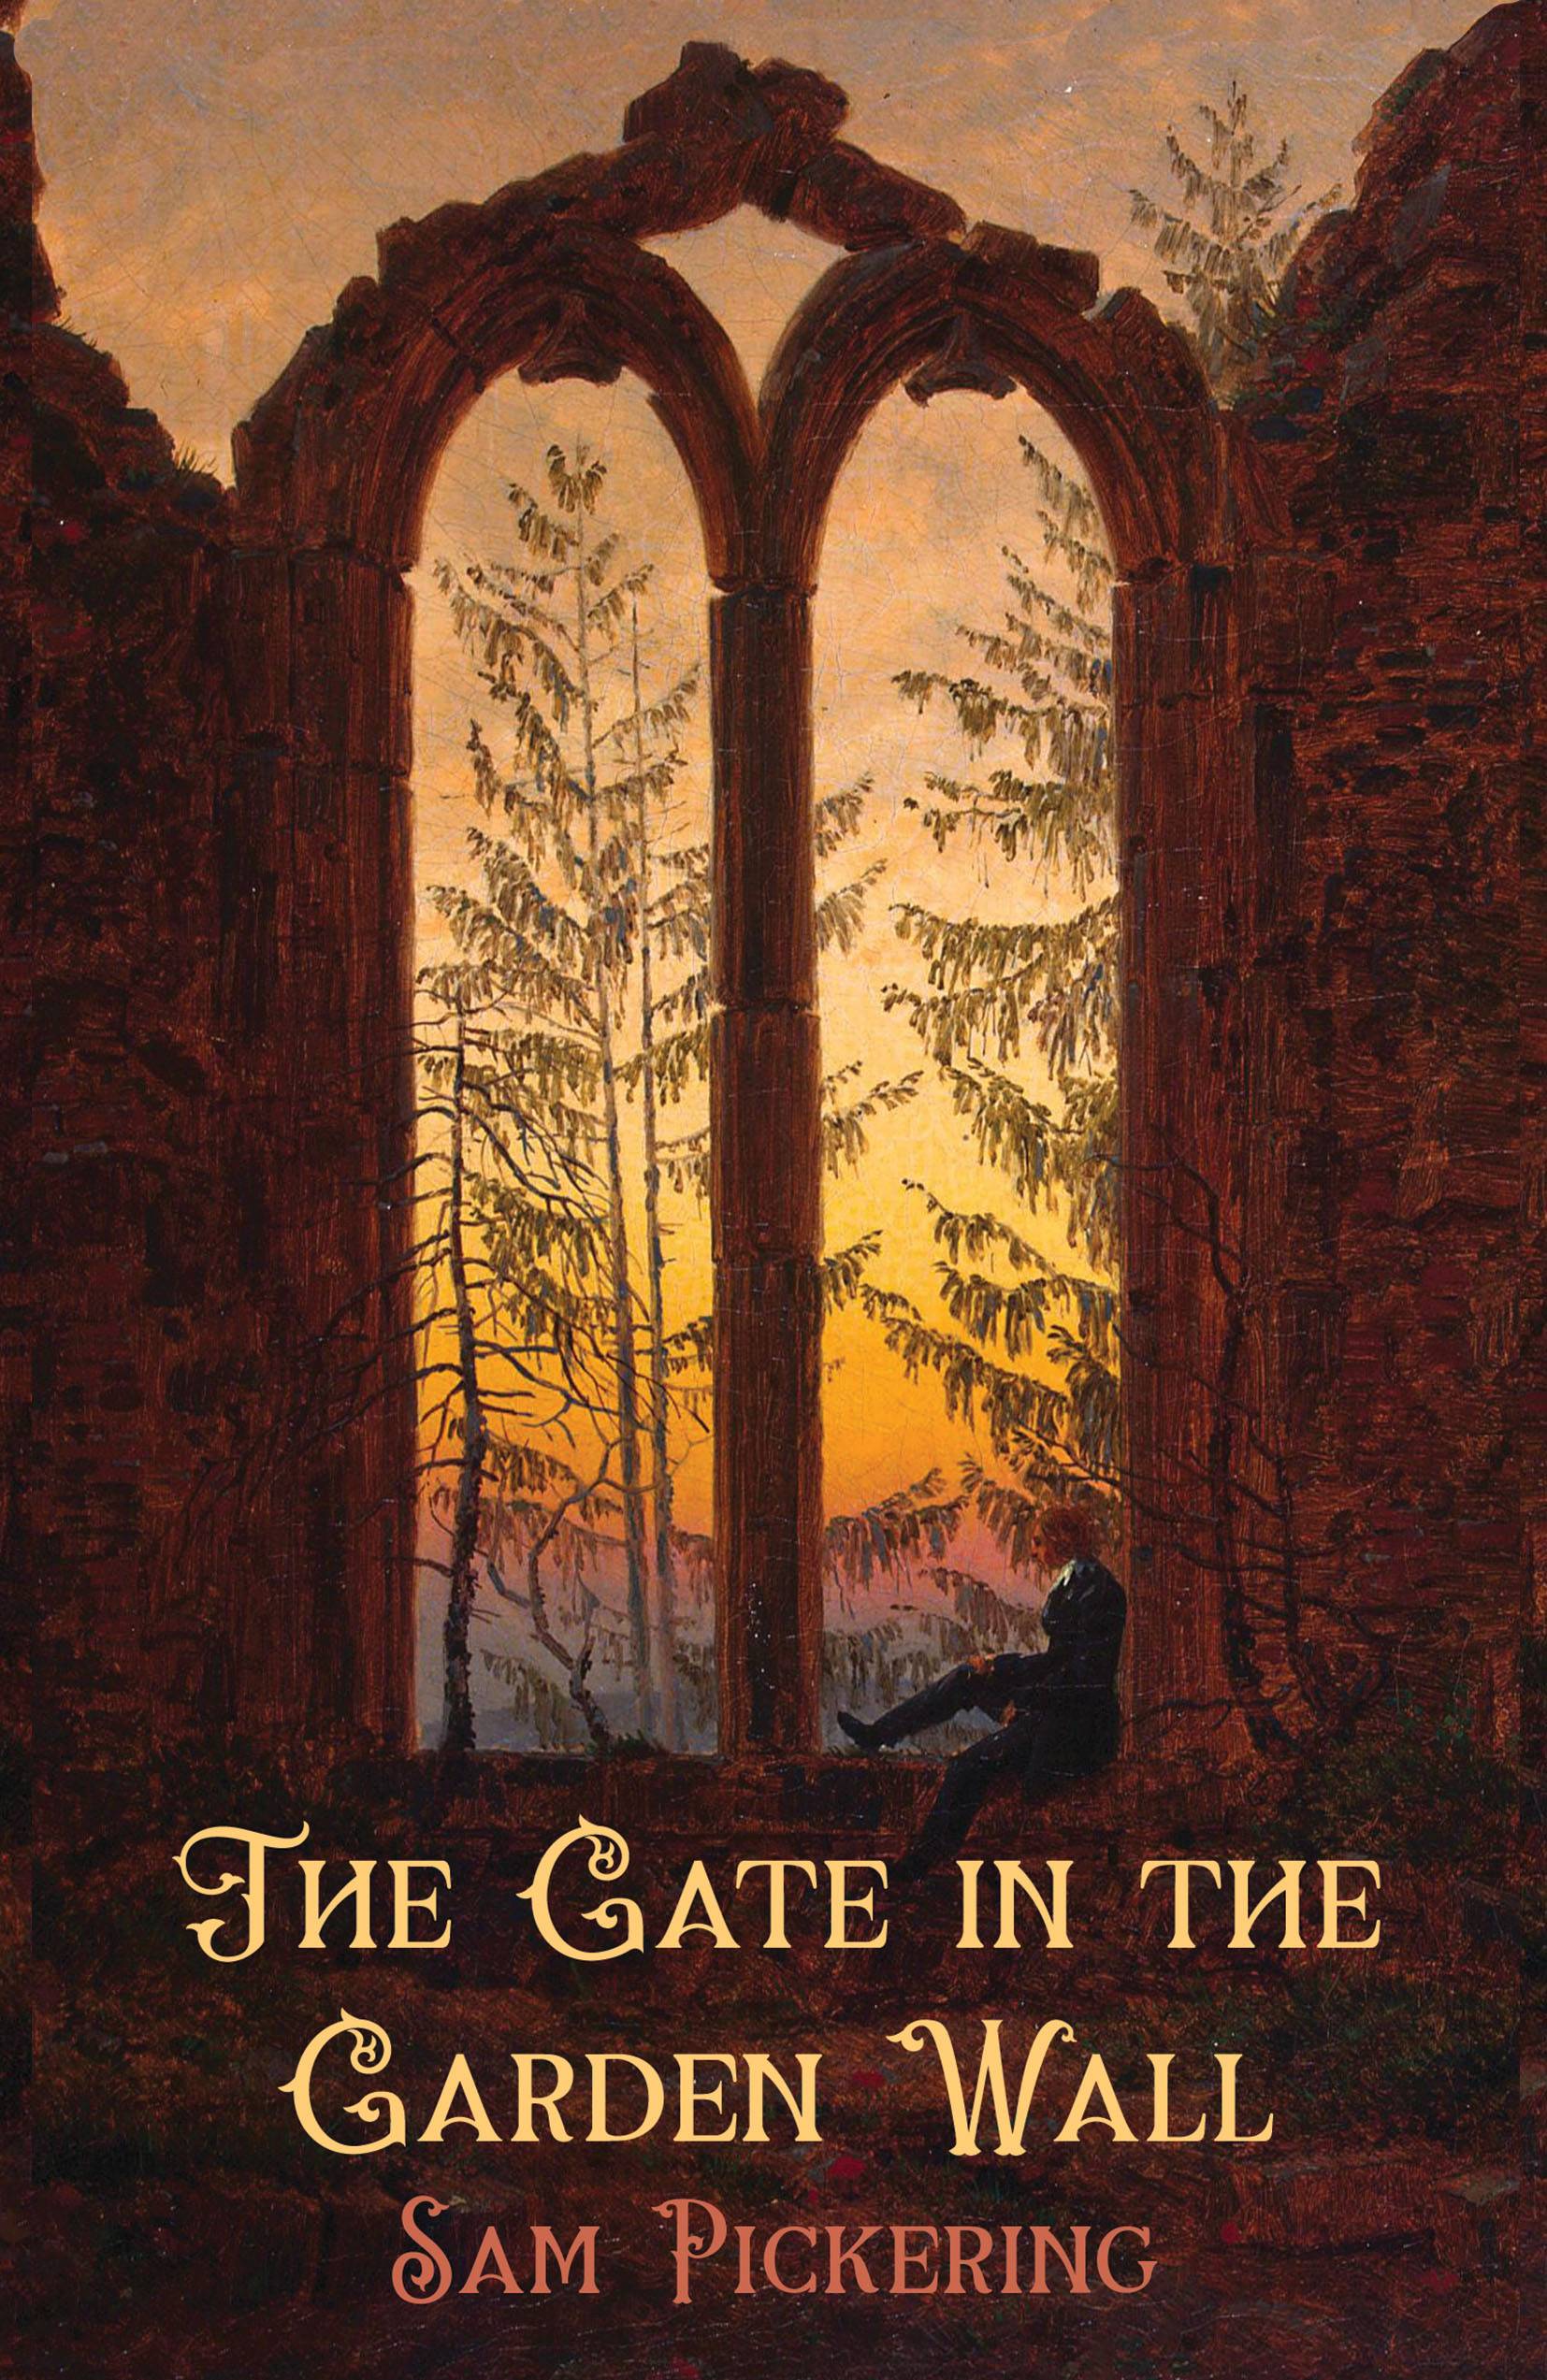 The Gate in the Garden Wall - essays by Sam Pickering